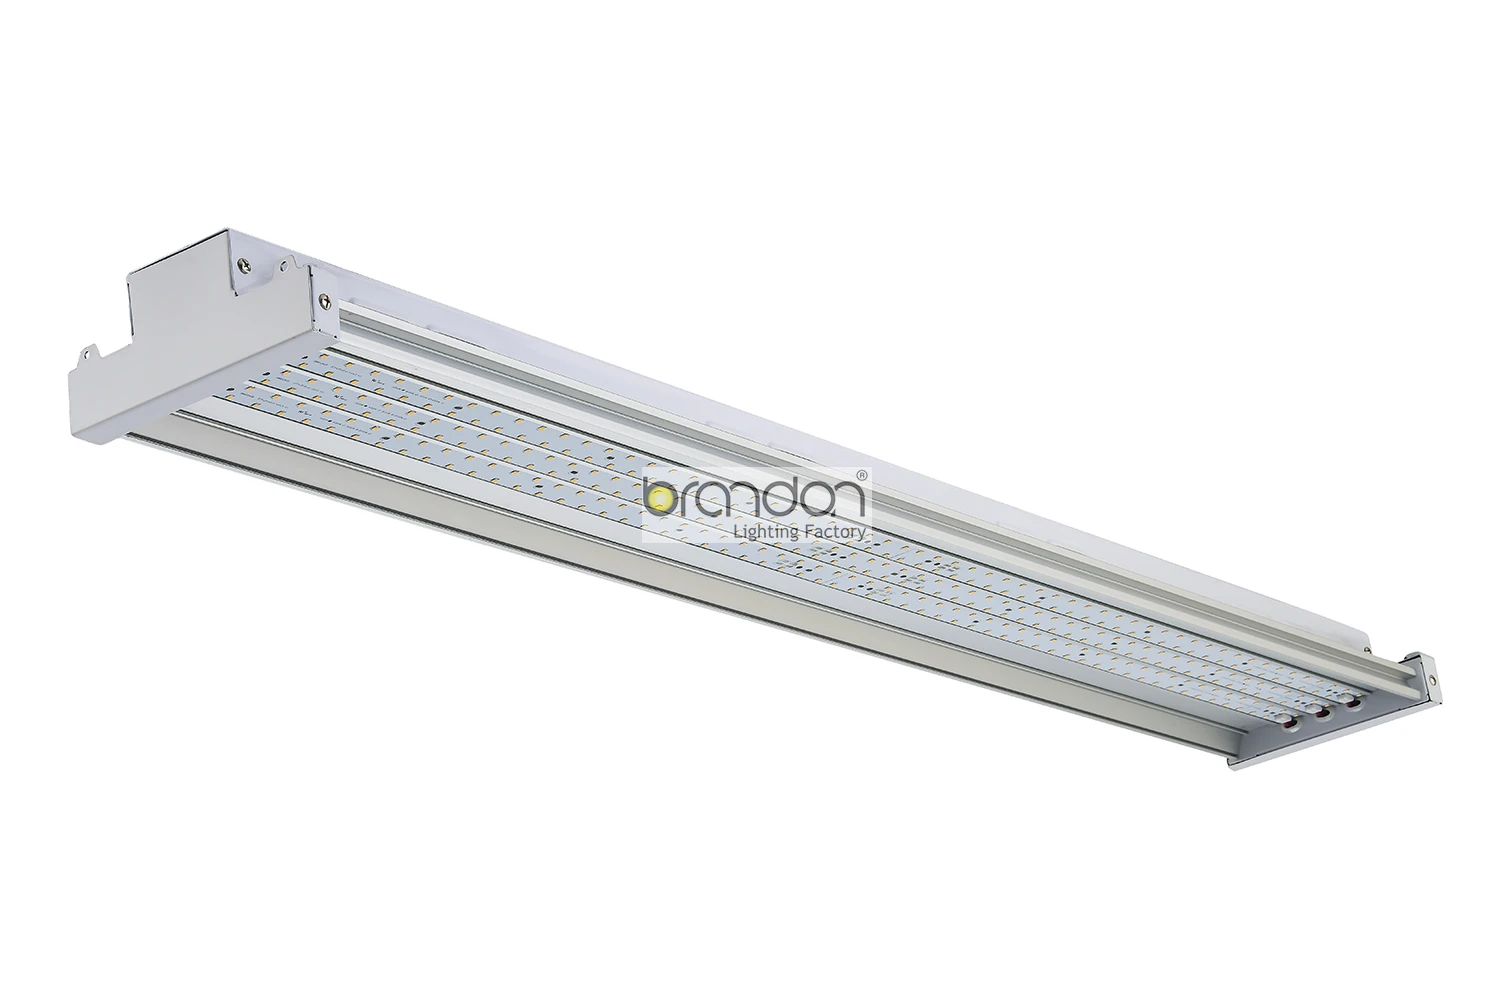 LED High Bay Warehouse Light Bright White 200W Linear Fixture workShop linear highbay 150w